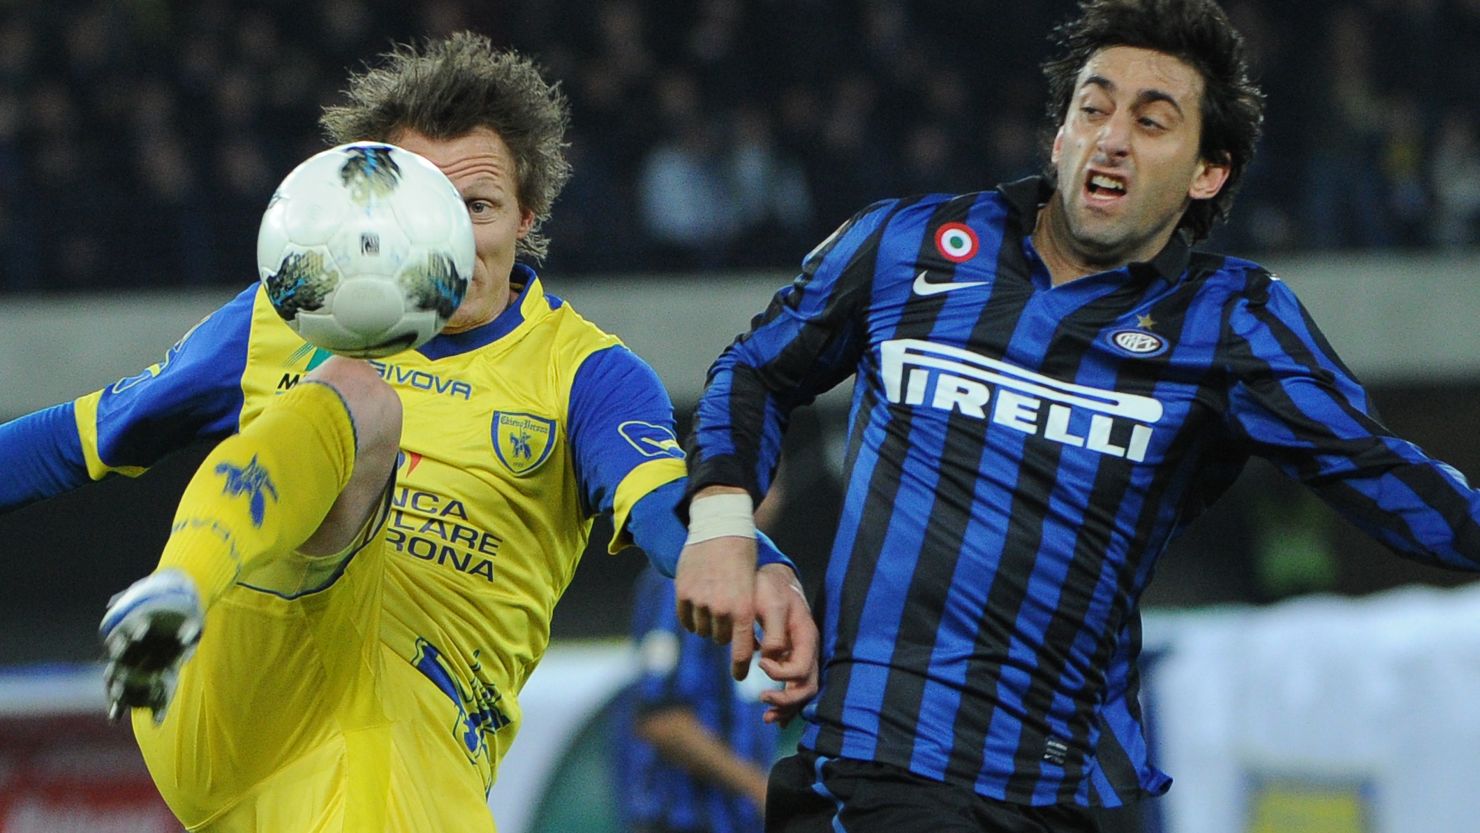 Argentine striker Diego Milito missed a penalty but also scored against Chievo as Inter Milan ended winless run in Serie A on Friday 